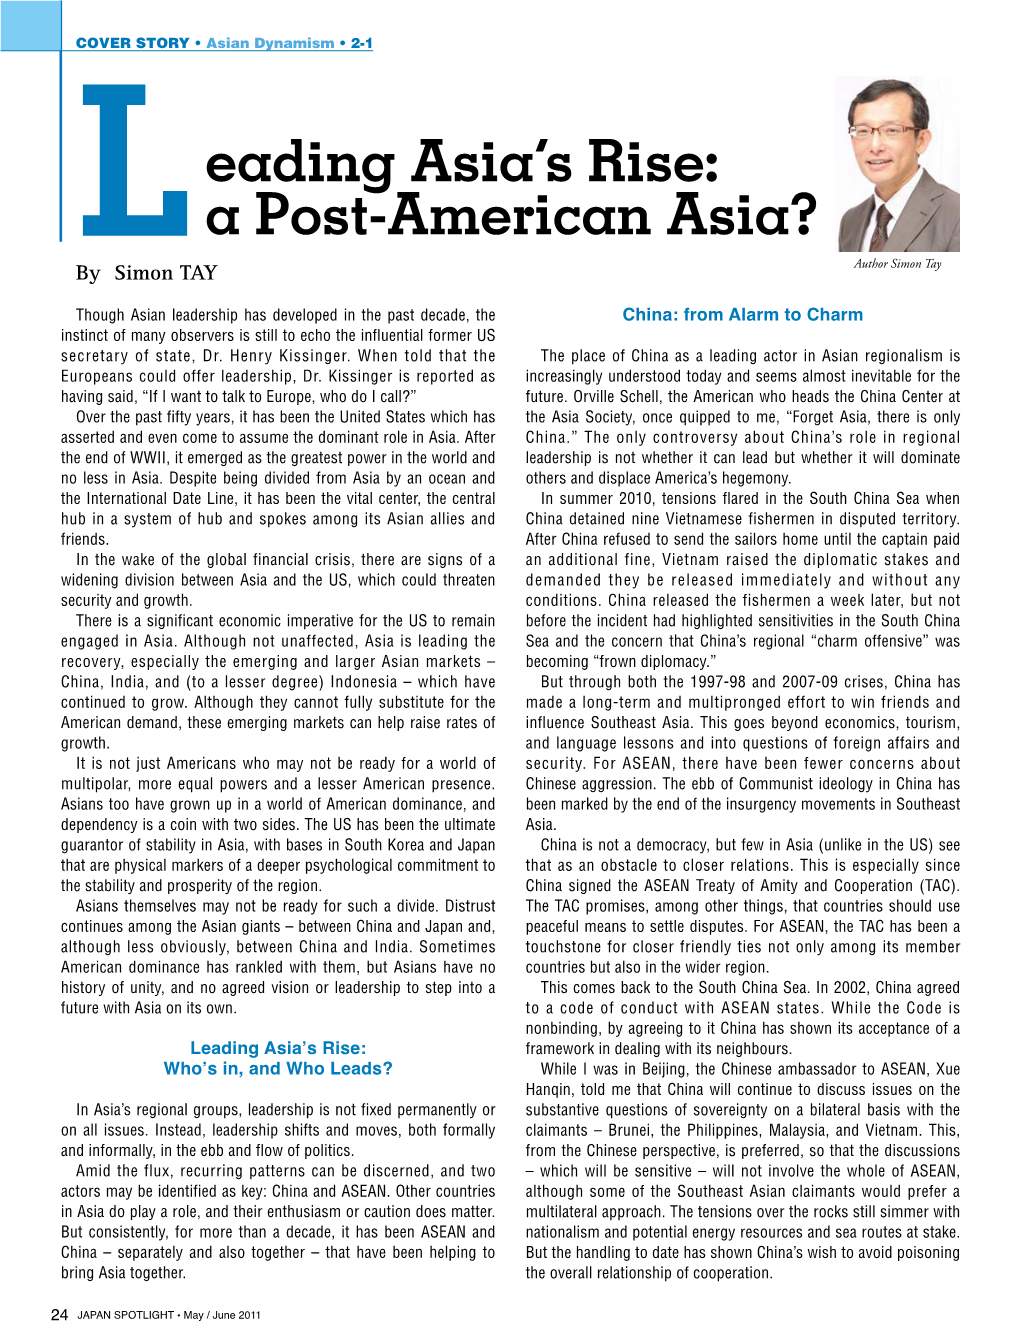 Eading Asia's Rise: a Post-American Asia?